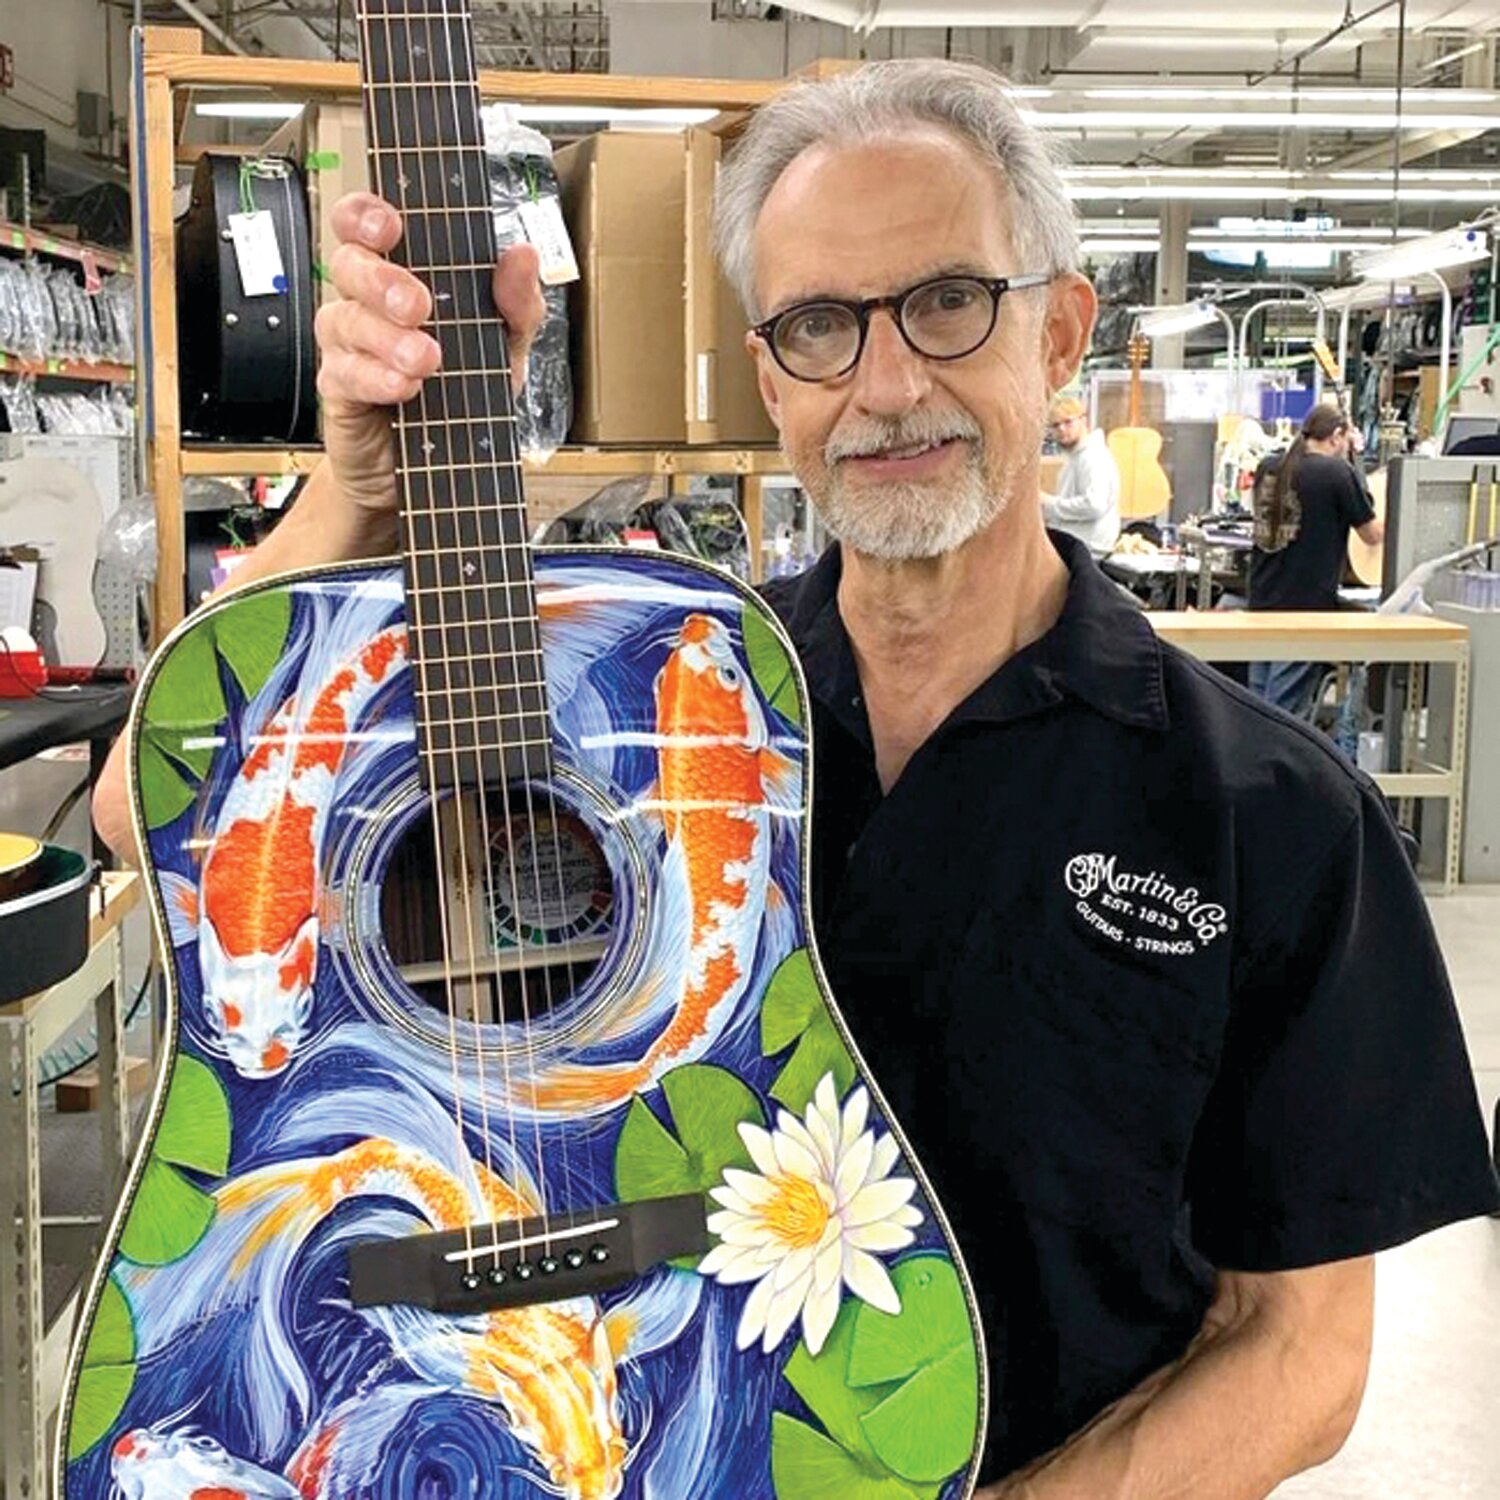 Robert Goetzl is an award-winning illustrator and cousin of C. F. Martin & Co. Executive Chairman Chris Martin IV. Goetzl, who has worked with the company on various guitar and museum-related projects since 2008, has been elected to the company’s board of directors.